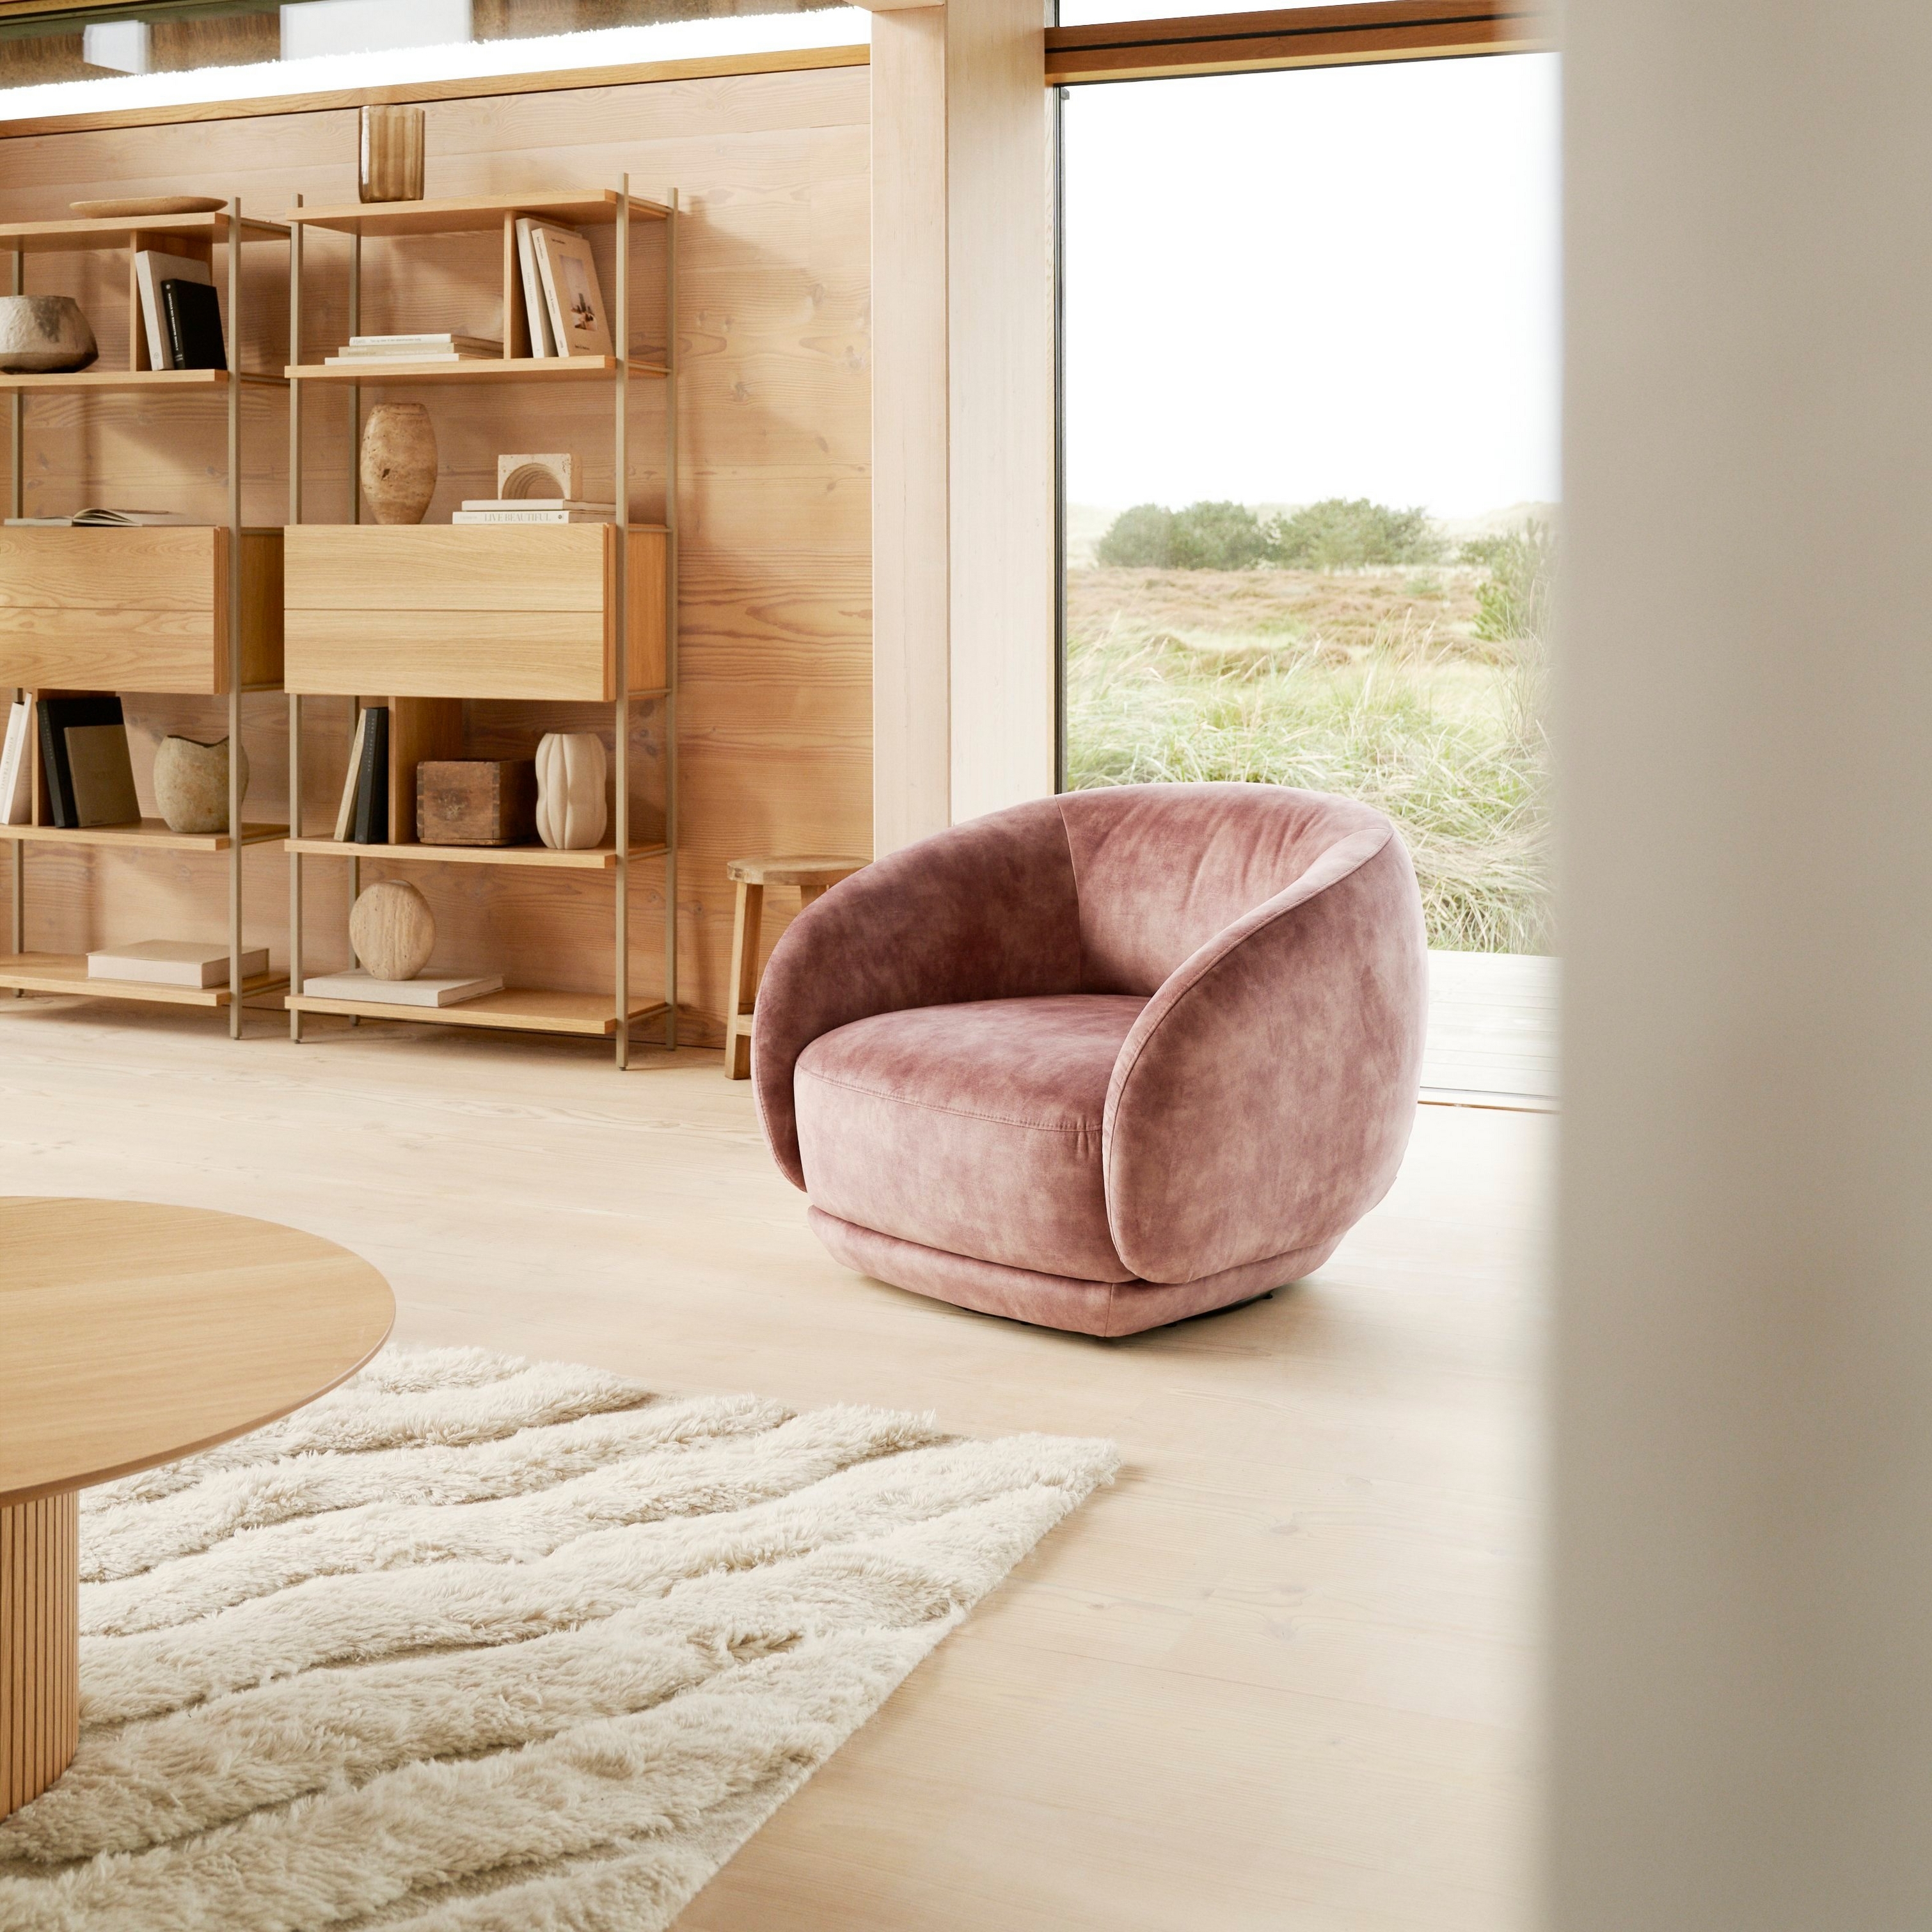 Quiet corner with the Bolzano armchair in beige Lazio fabric and the Eden footstool in sand Skagen fabric.